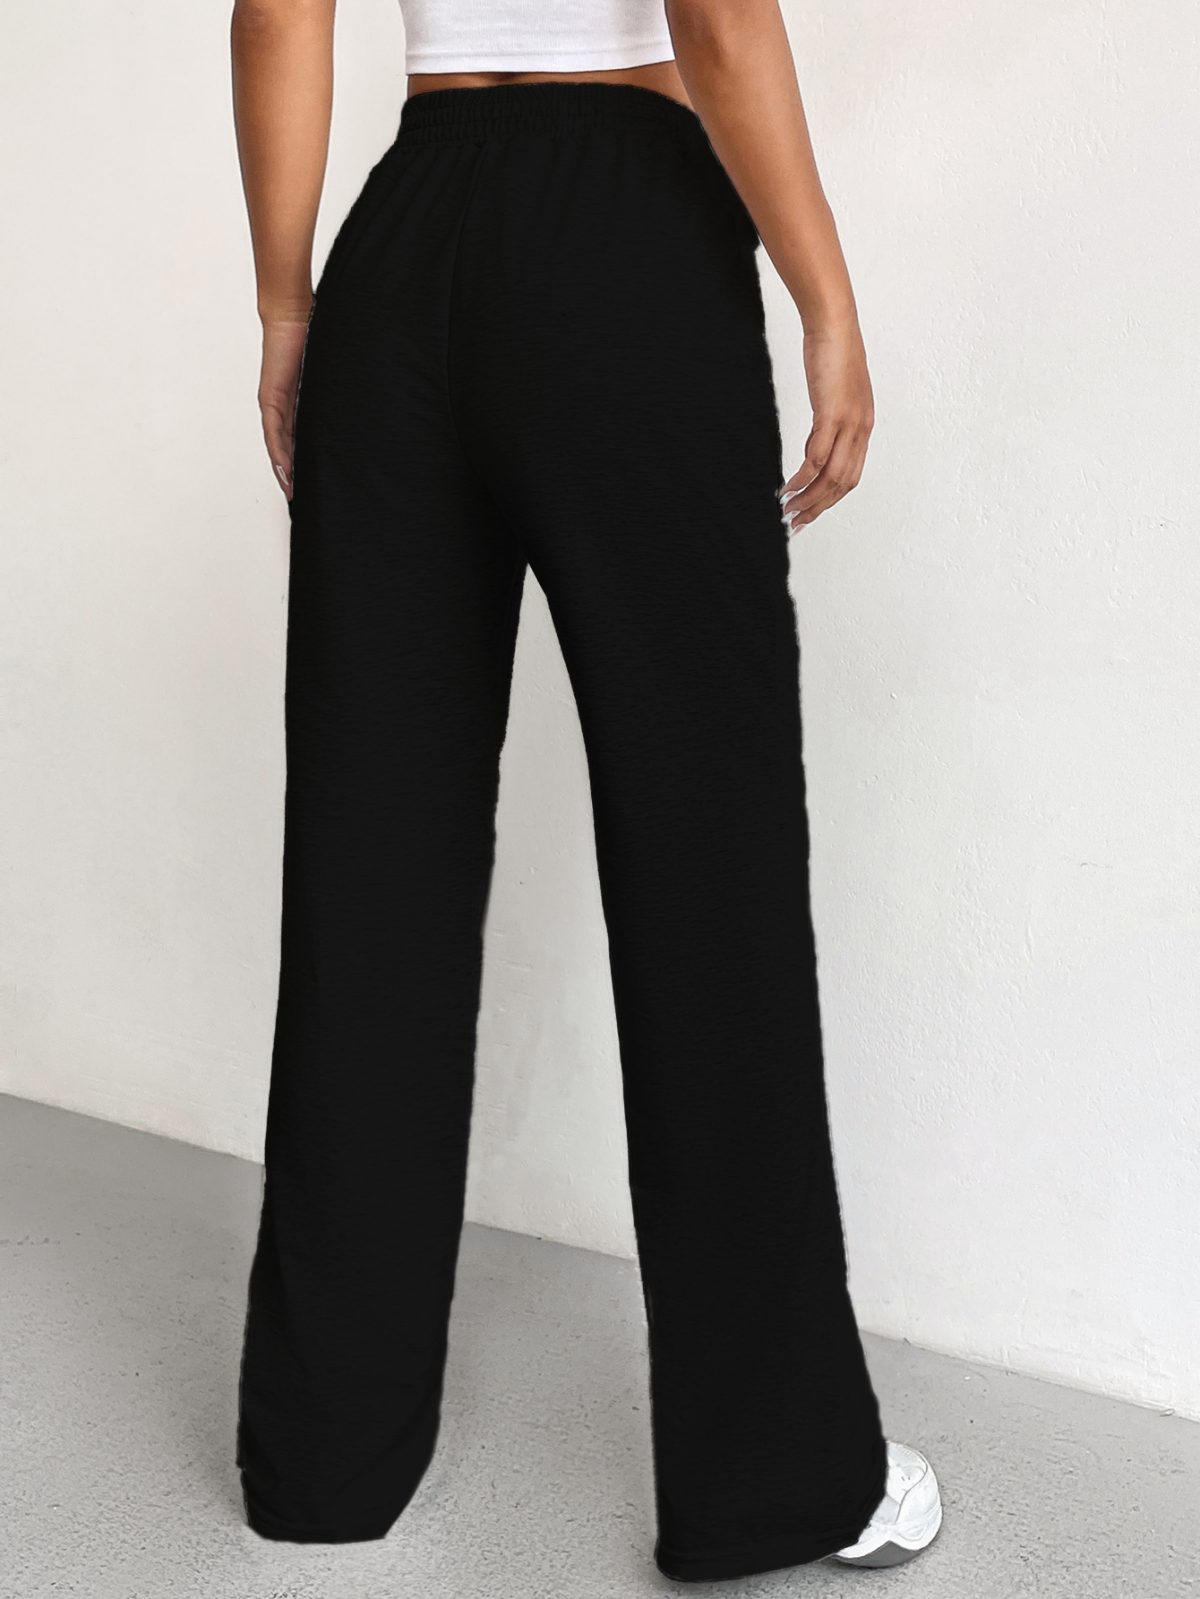 Loose Casual Solid Color Wide Leg Length Pants in Pants